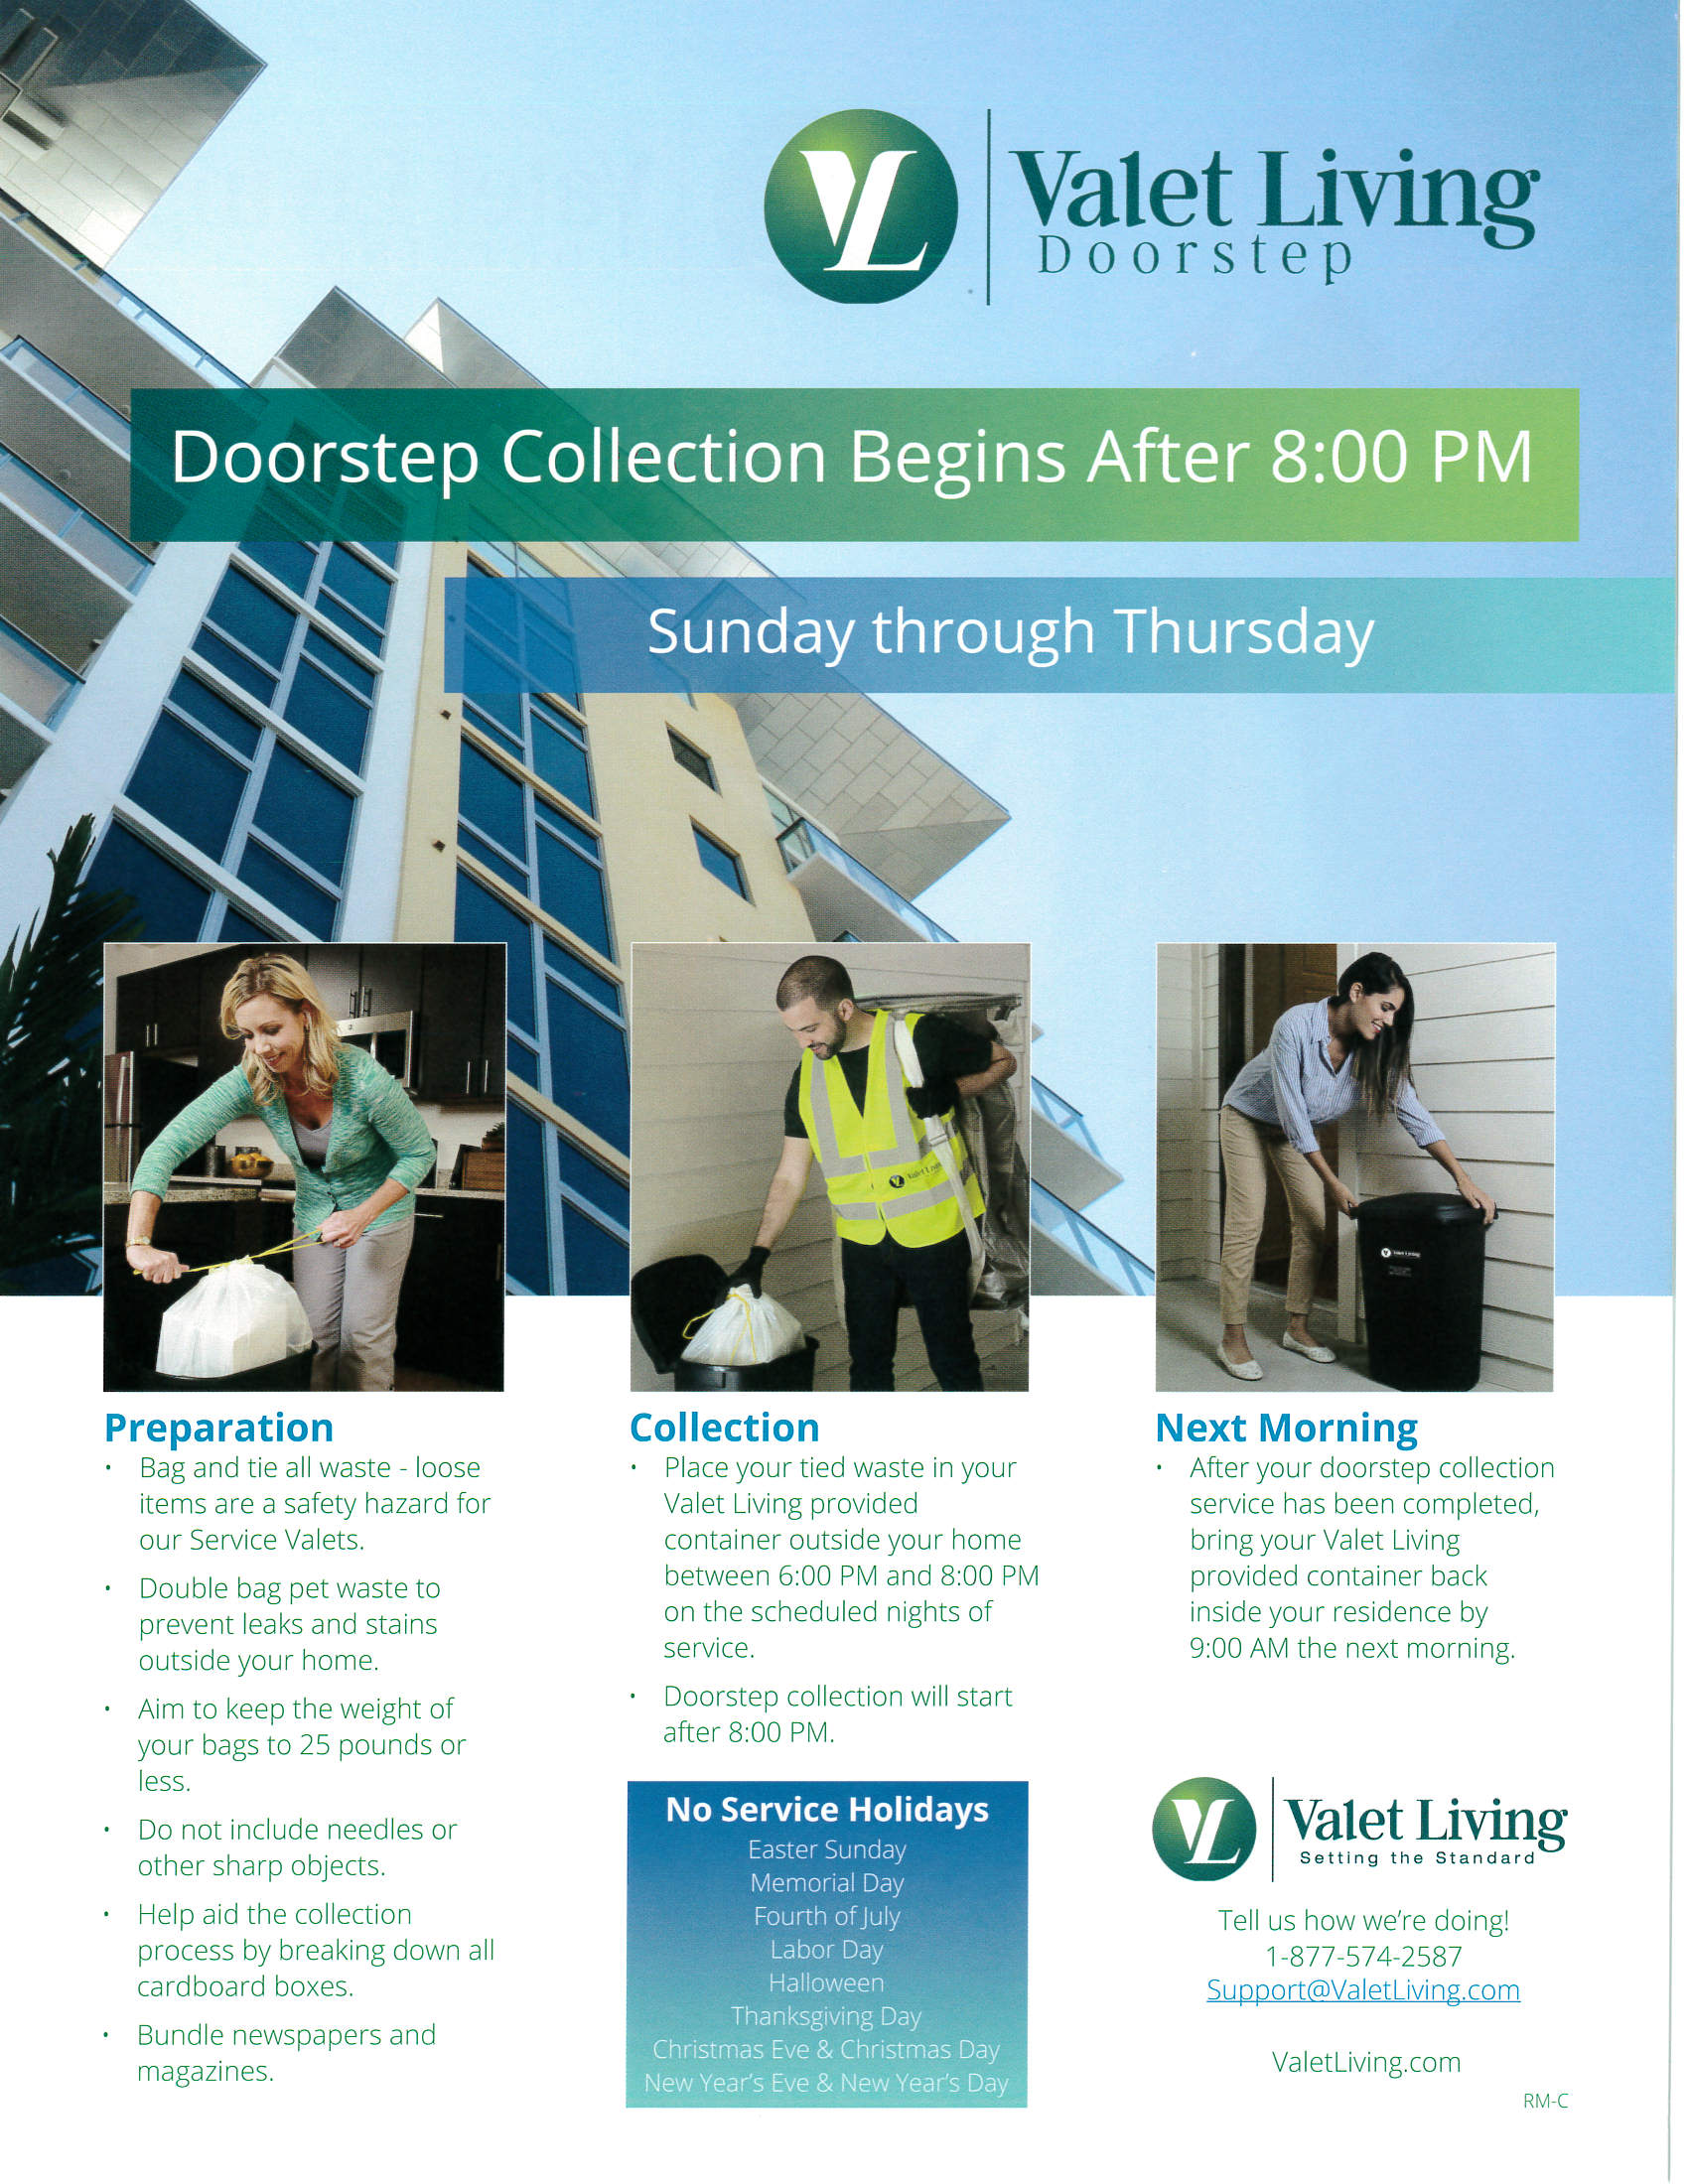 A flyer promoting valet living's doorstep collection for Apartments in The Woodlands TX.
Keywords: Apartments in The Woodlands TX